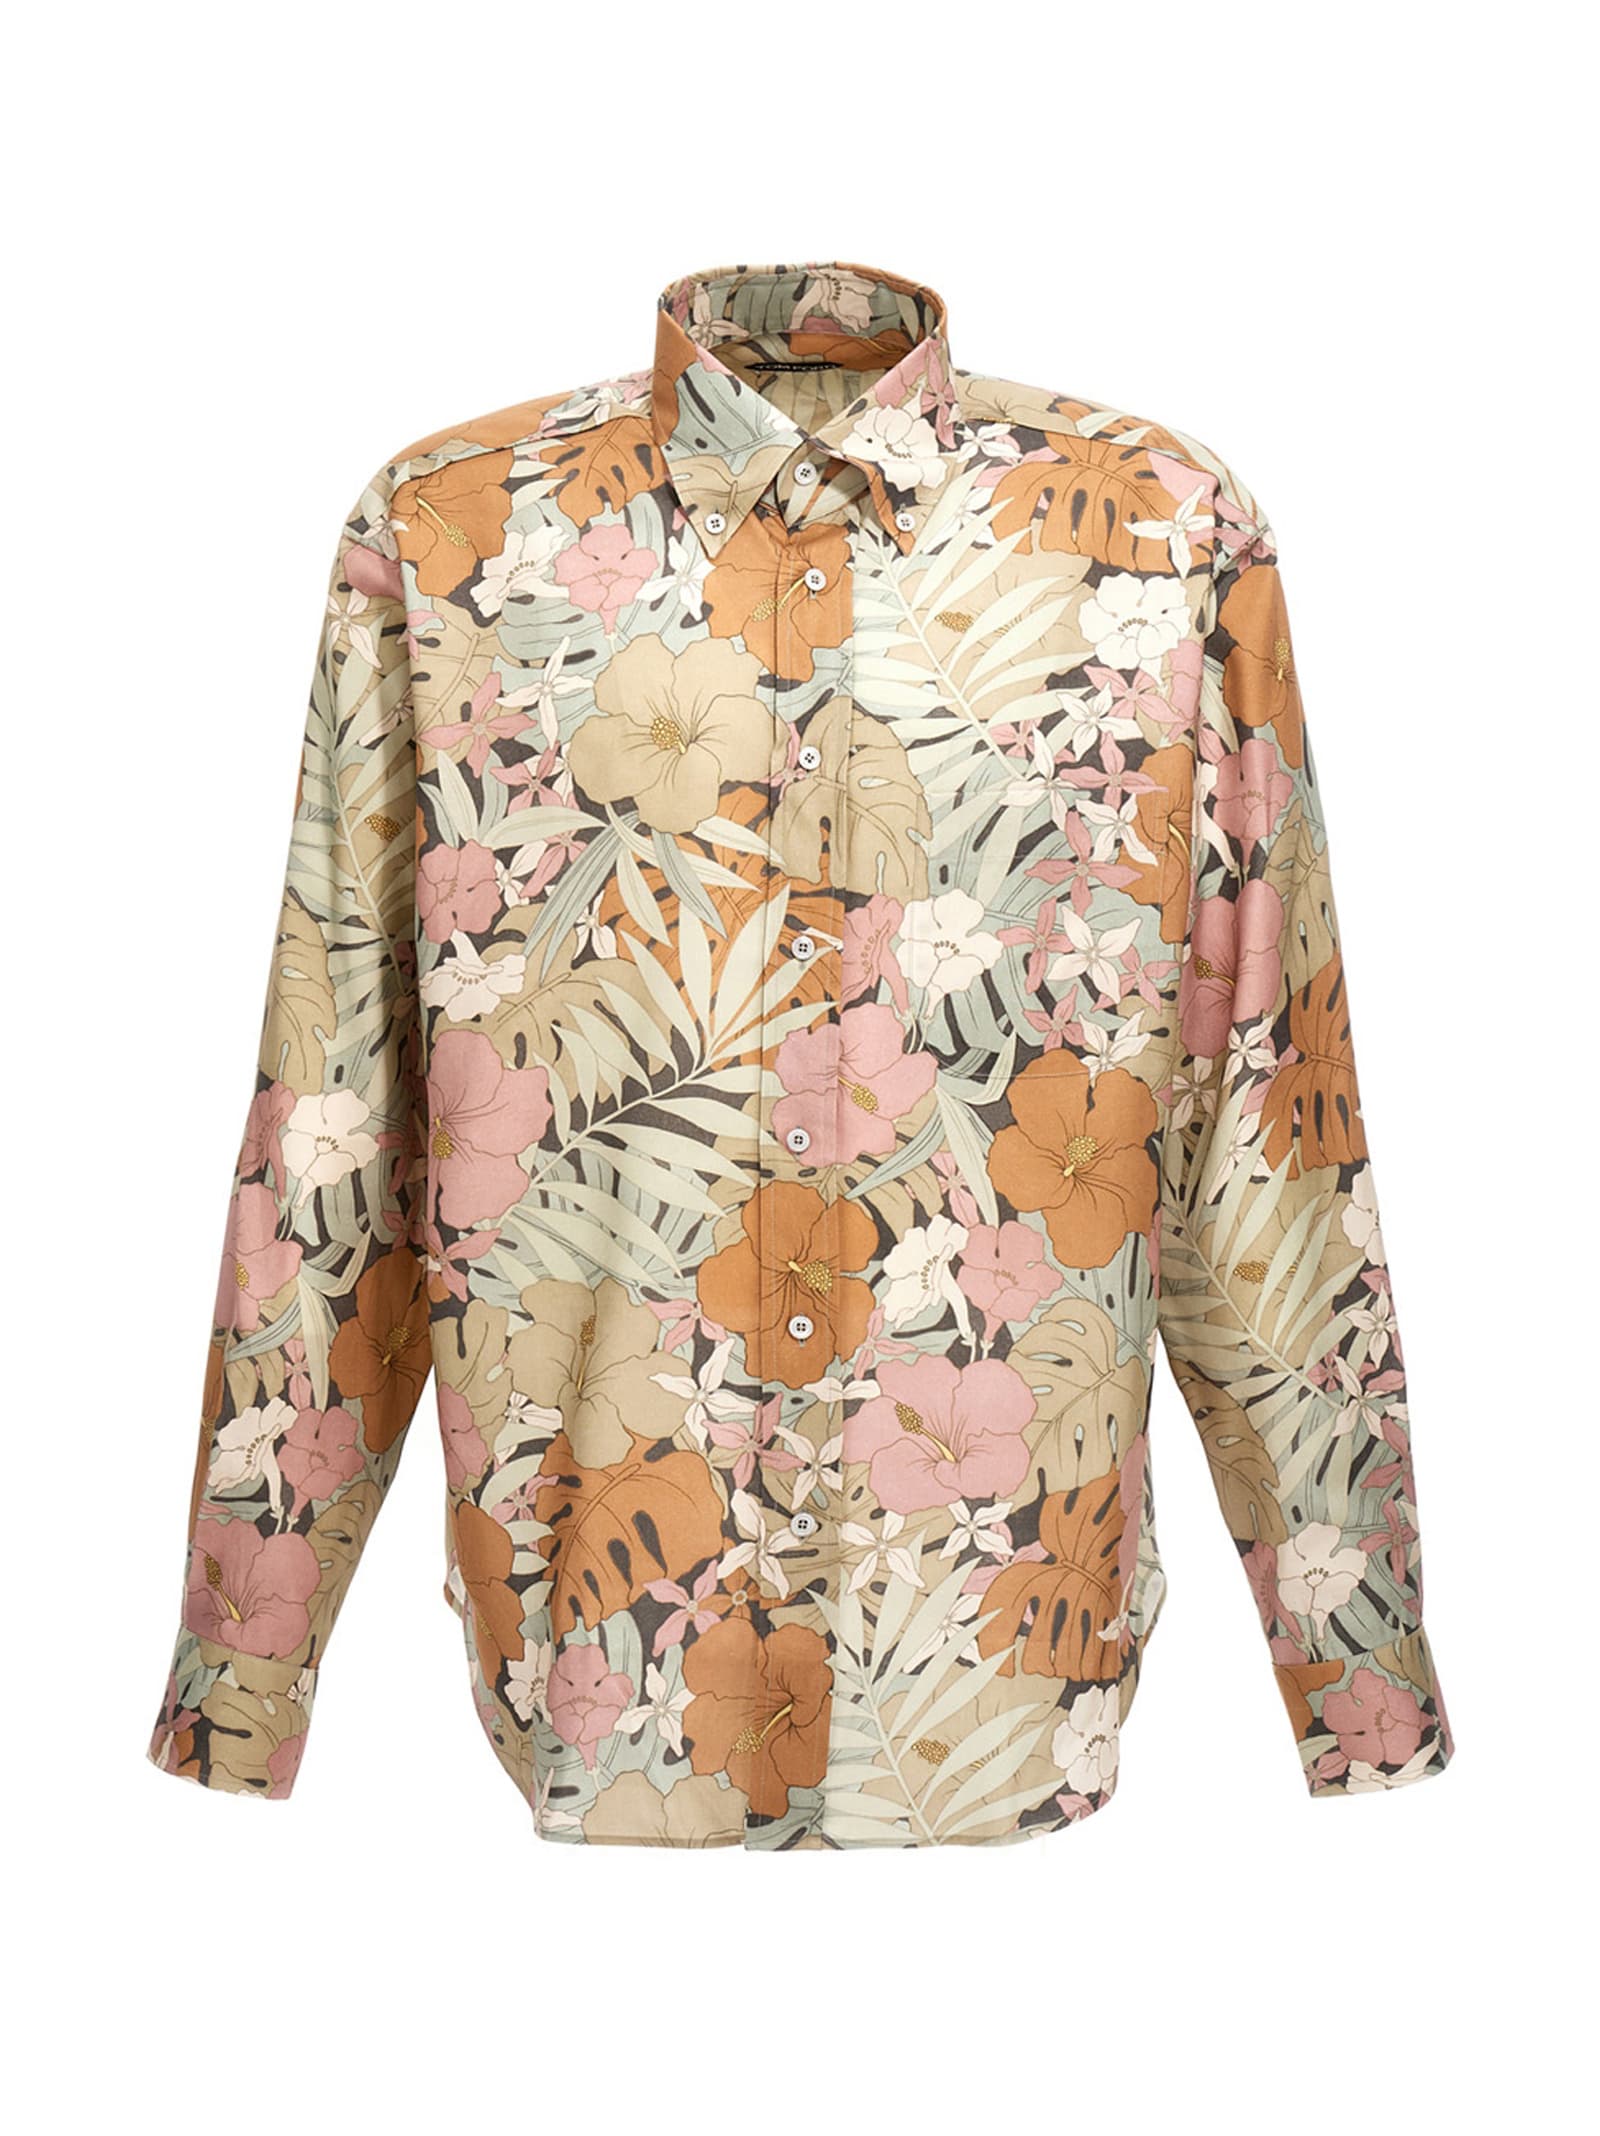 Tom Ford Floral Shirt In Pink